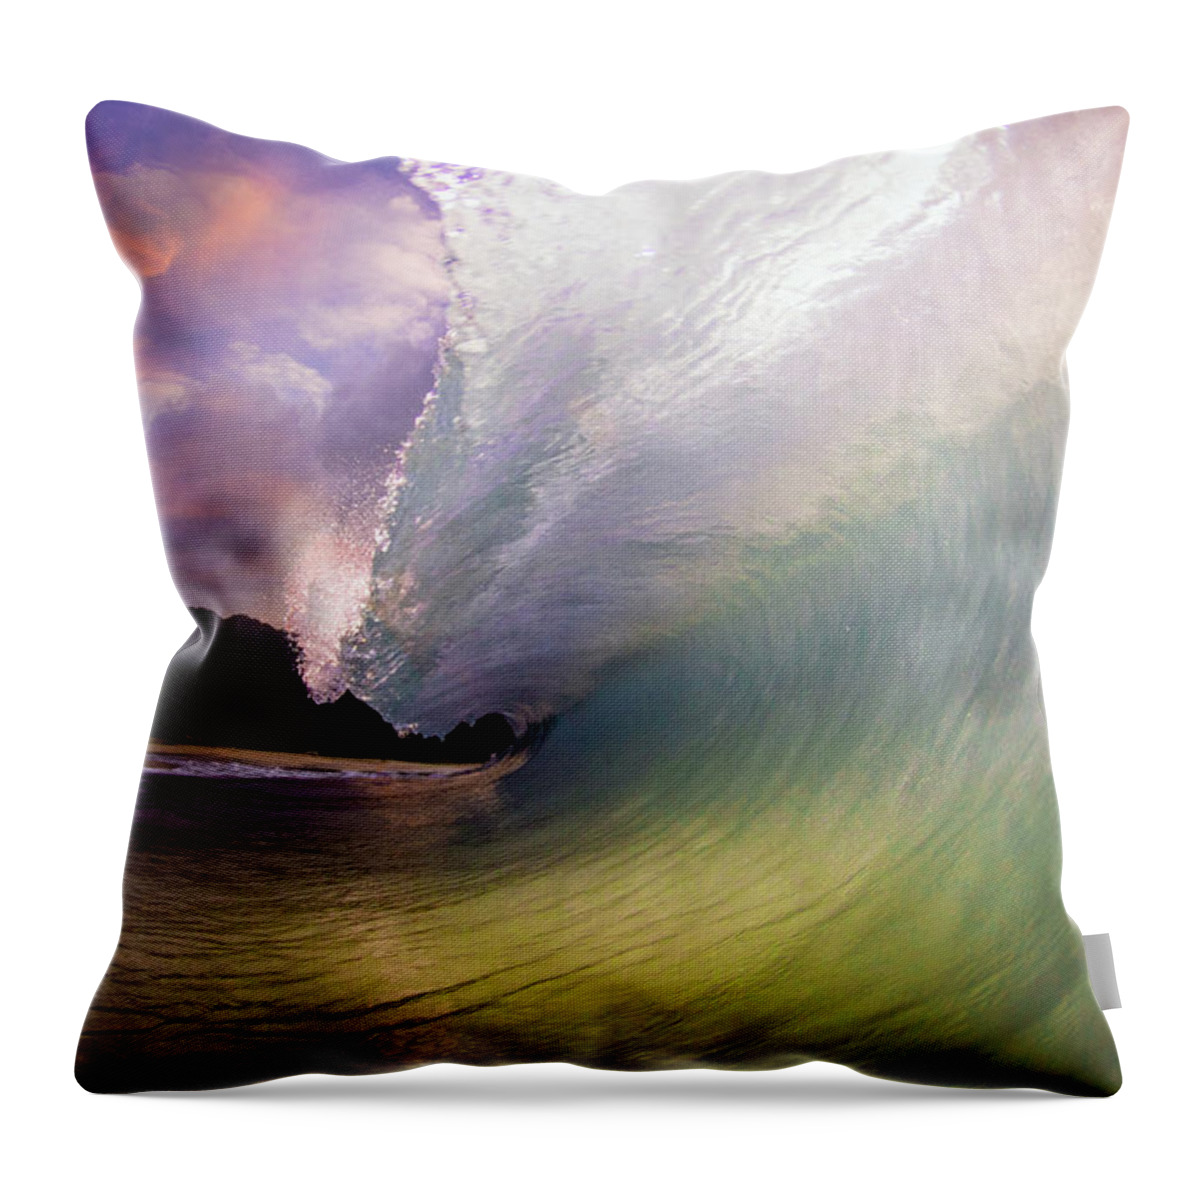 Barrel Waves Ocean Shorebreak West Side Oahu Mountains Sunset Clouds Throw Pillow featuring the photograph In The Tube #7 by James Roemmling